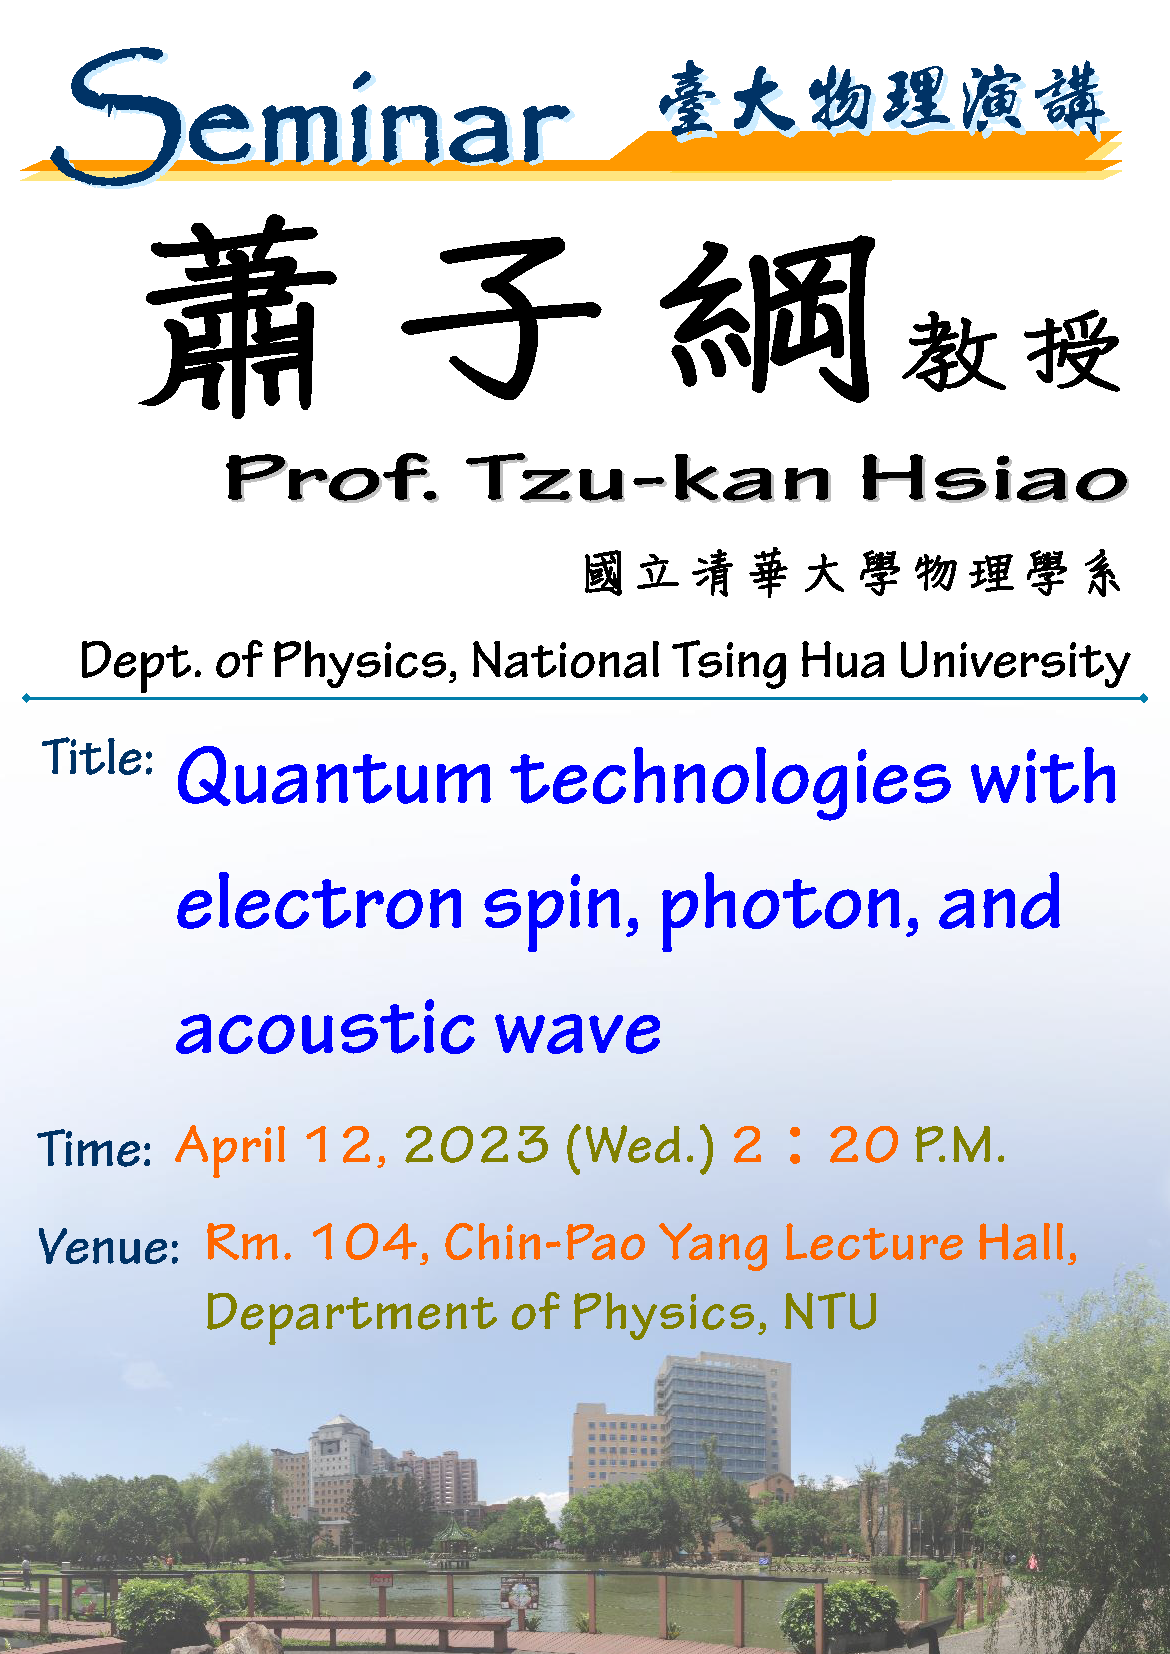 Quantum technologies with electron spin, photon, and acoustic wave